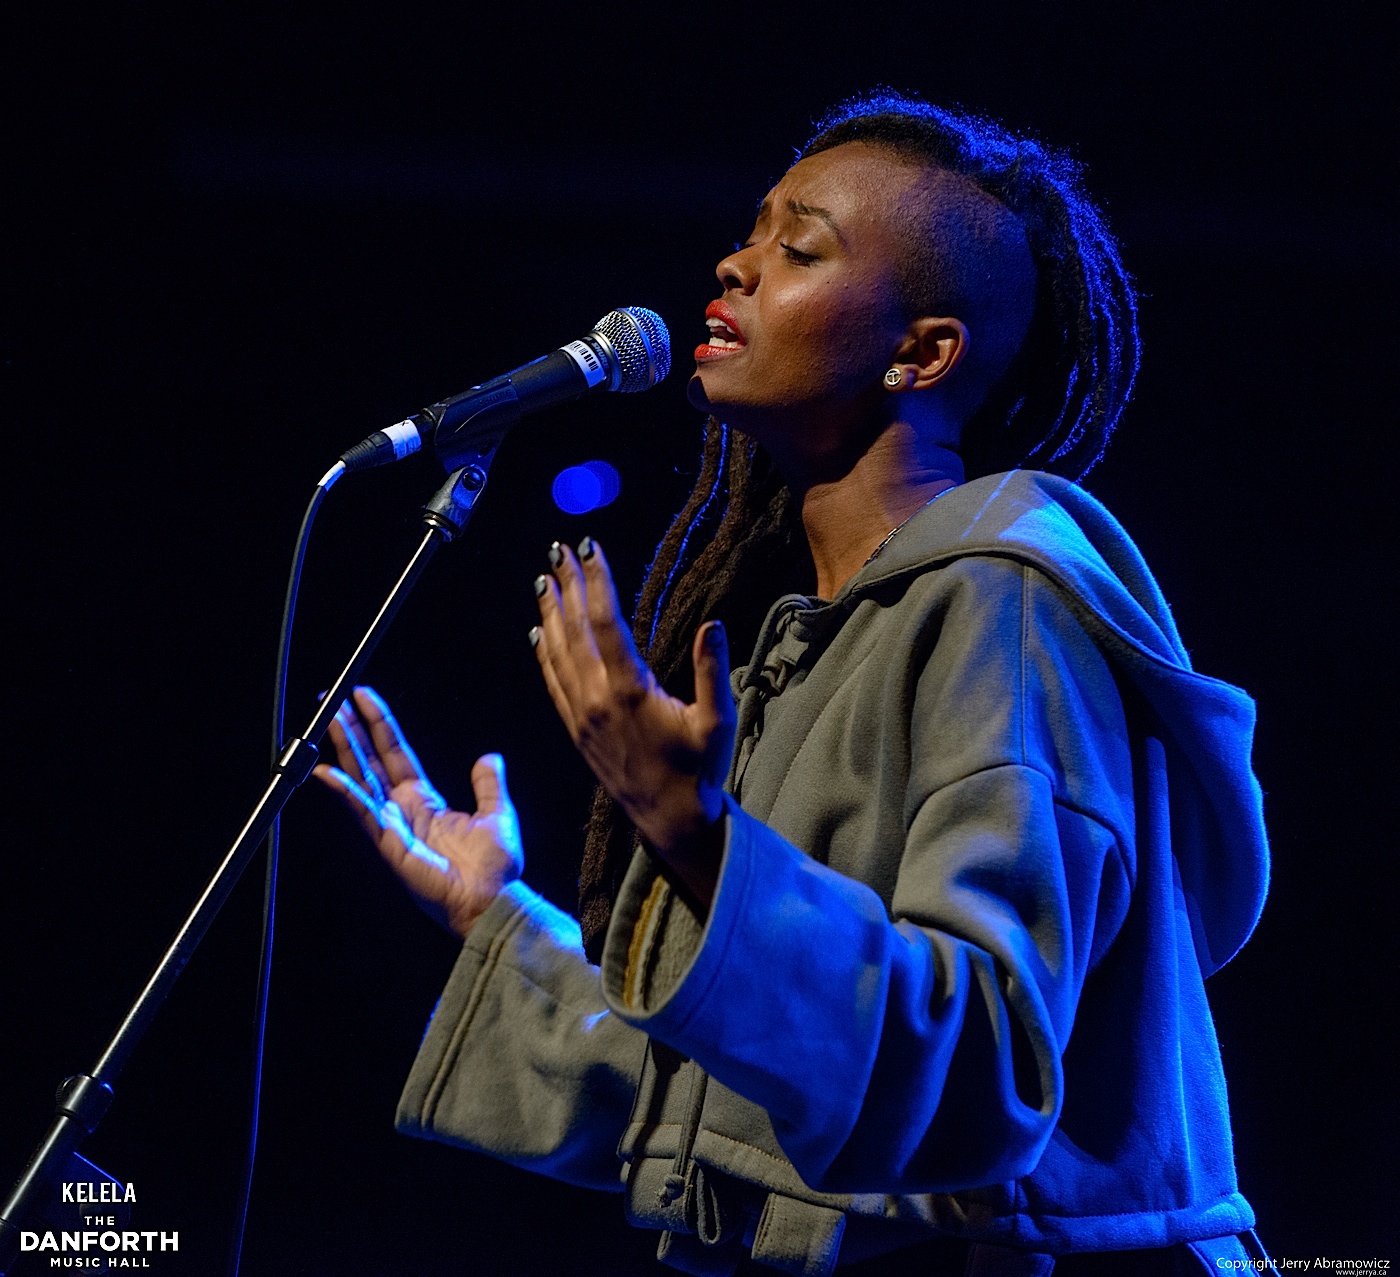 Kelela plays to a packed house at The Danforth Music Hall